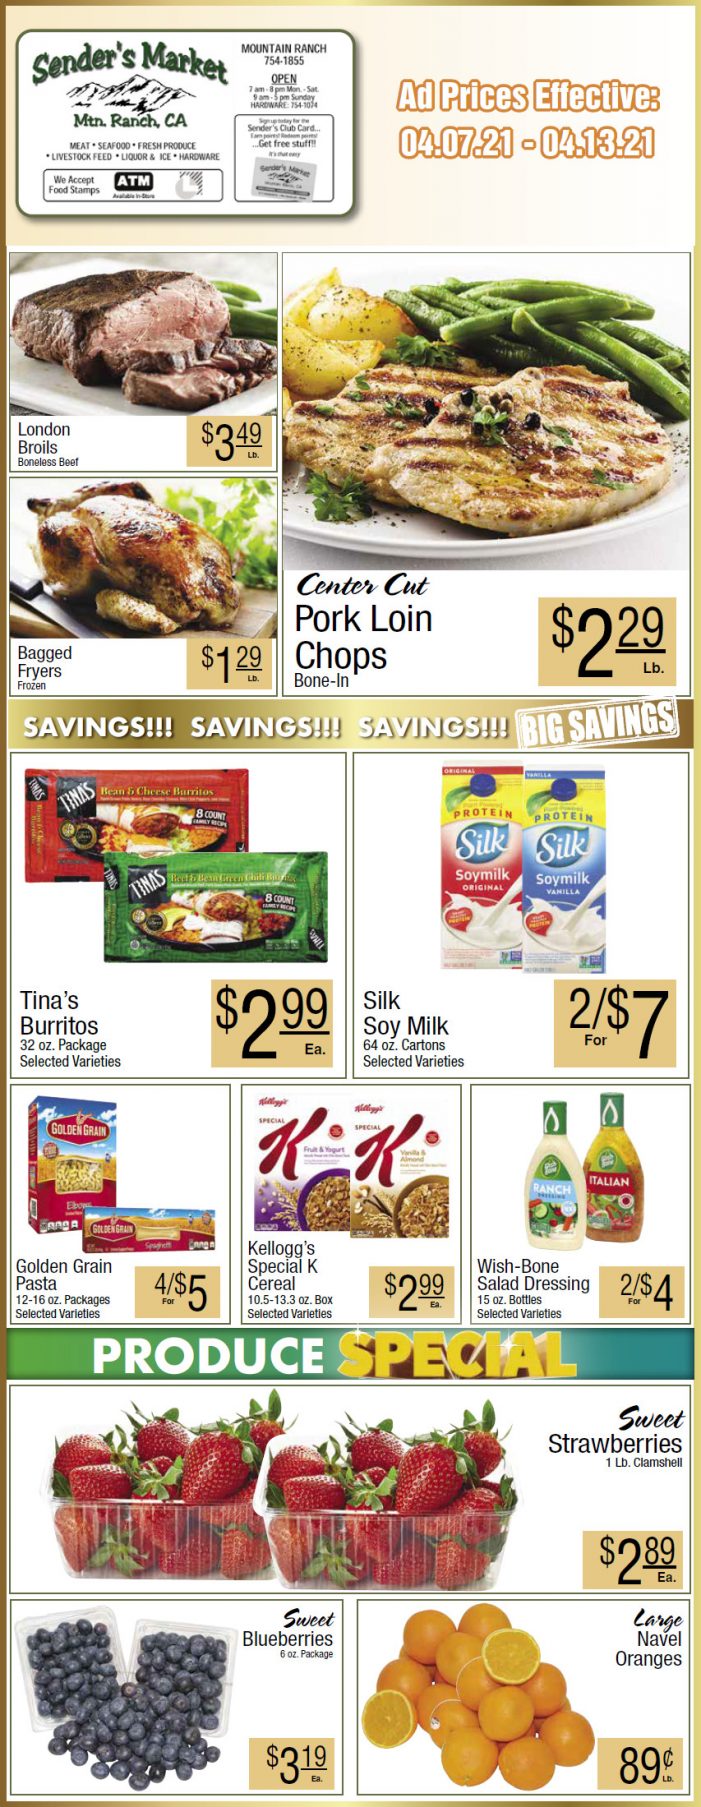 Sender’s Market’s Weekly Ad & Grocery Specials Through April 13th.  Shop Local & Save!